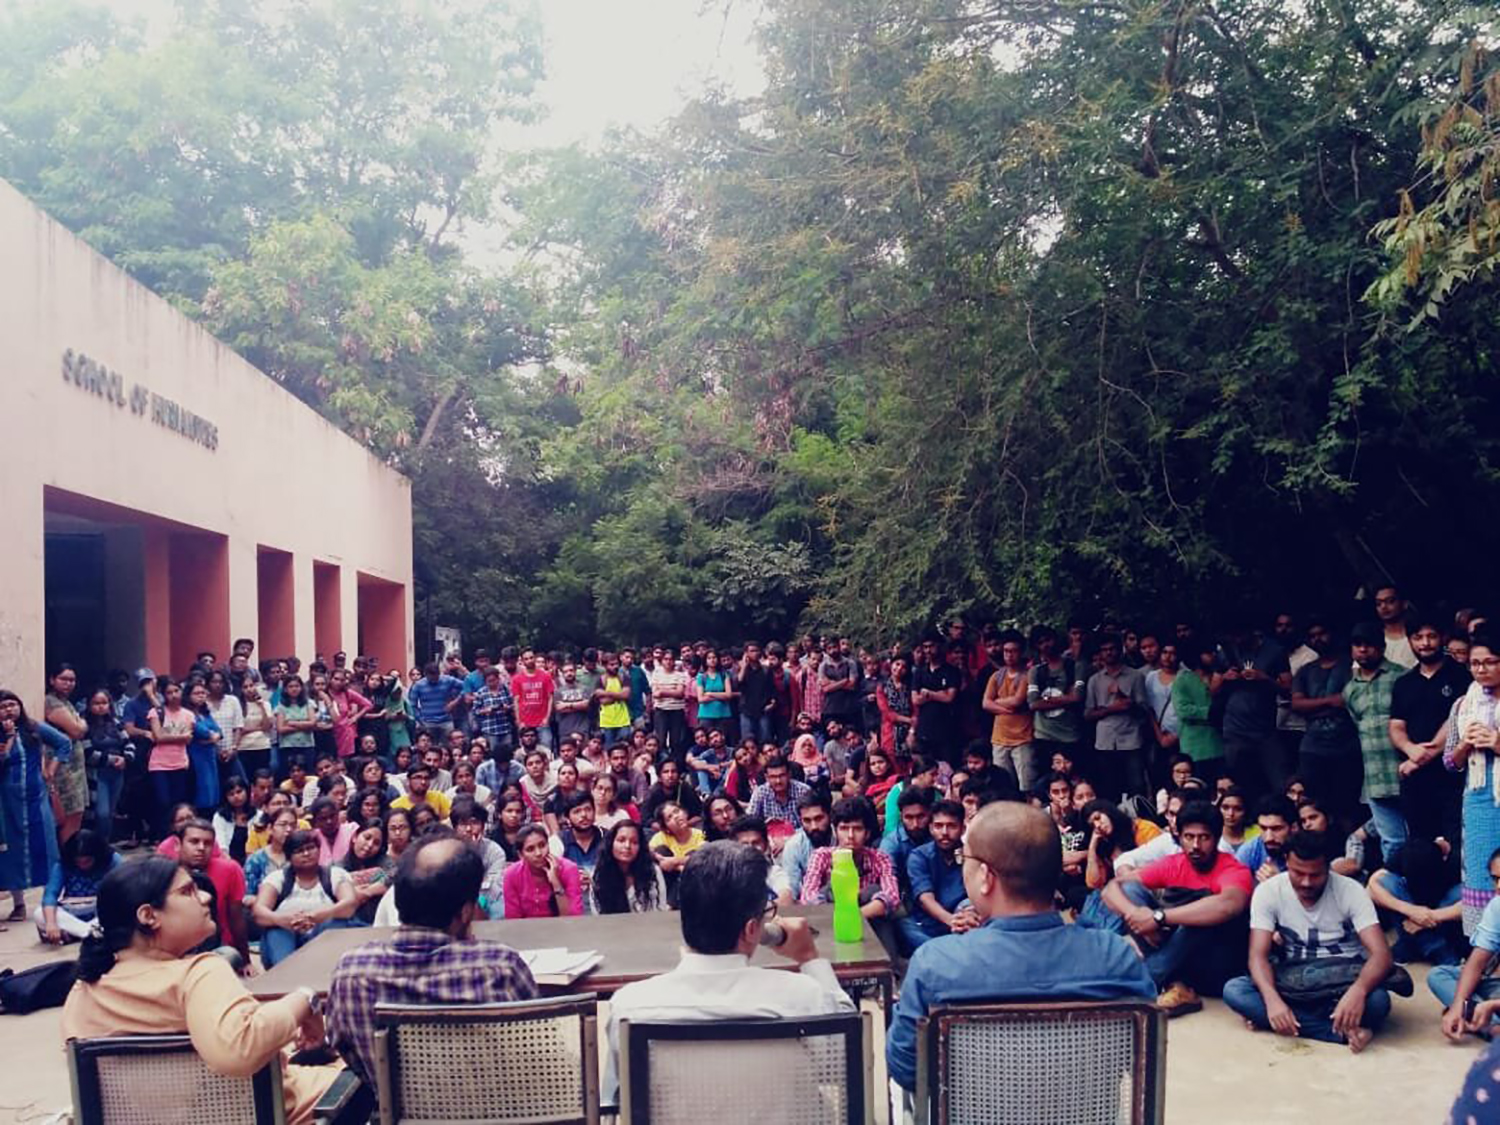 Kashmir-related protests and discussions stopped at the University of Hyderabad